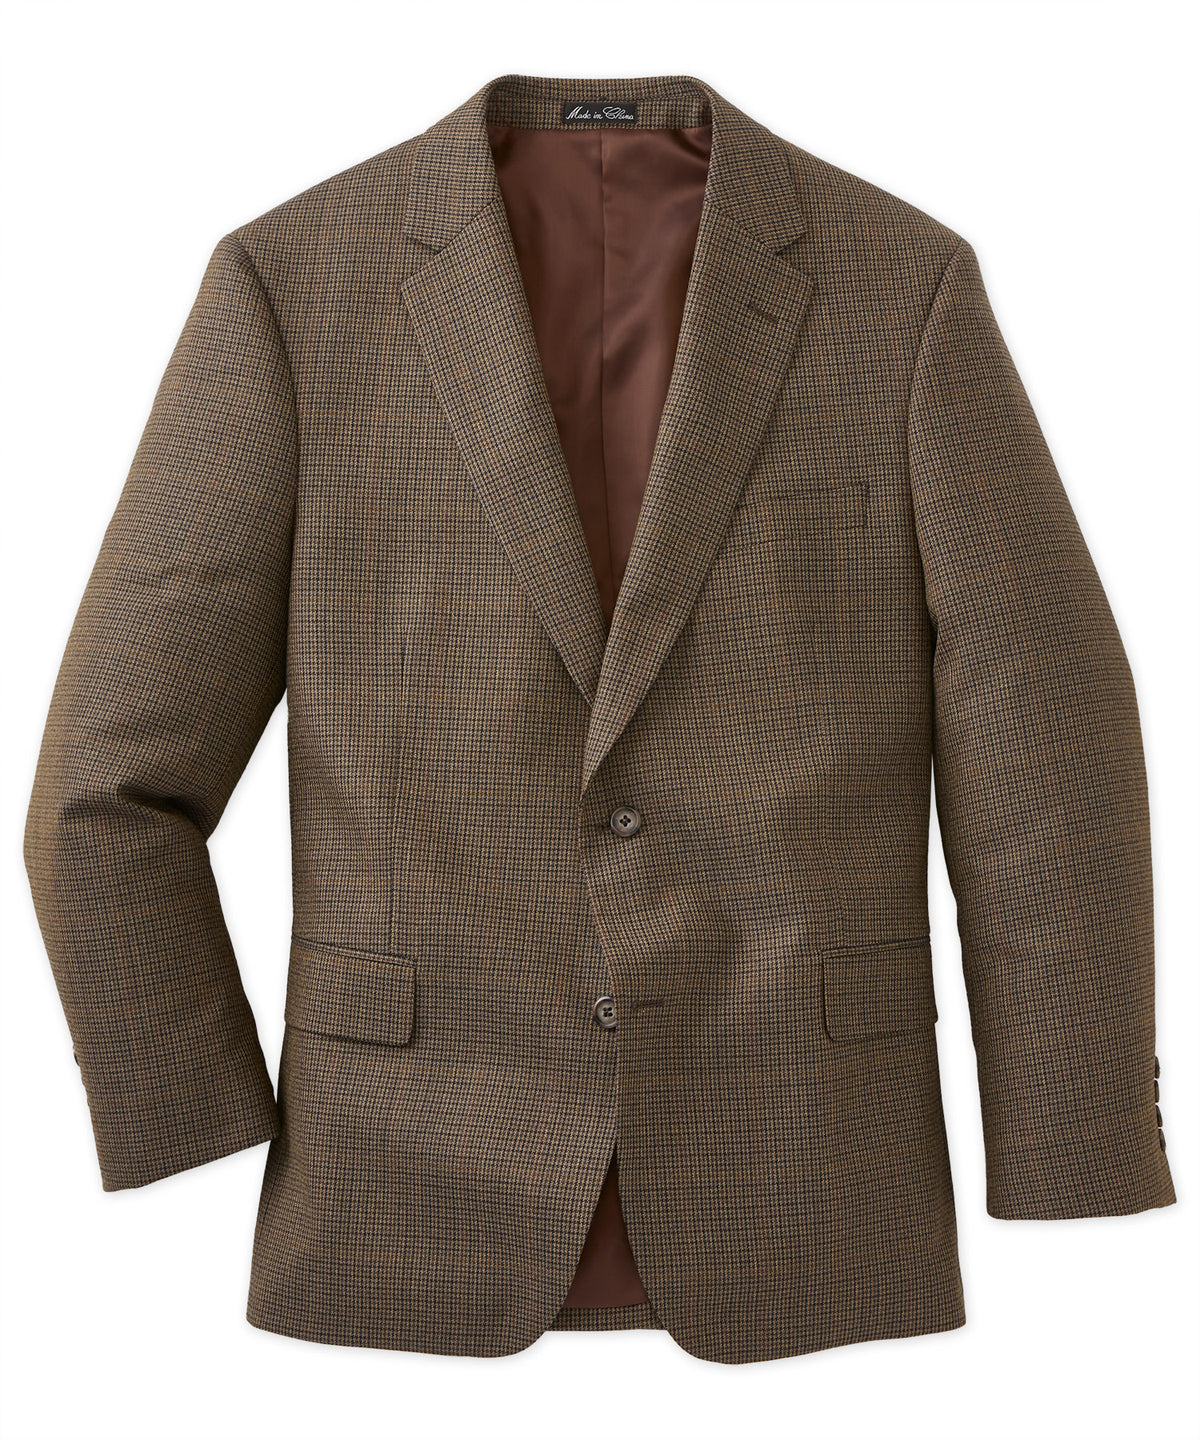 Westport 1989 Two-Button Houndstooth Sport Coat, Big & Tall